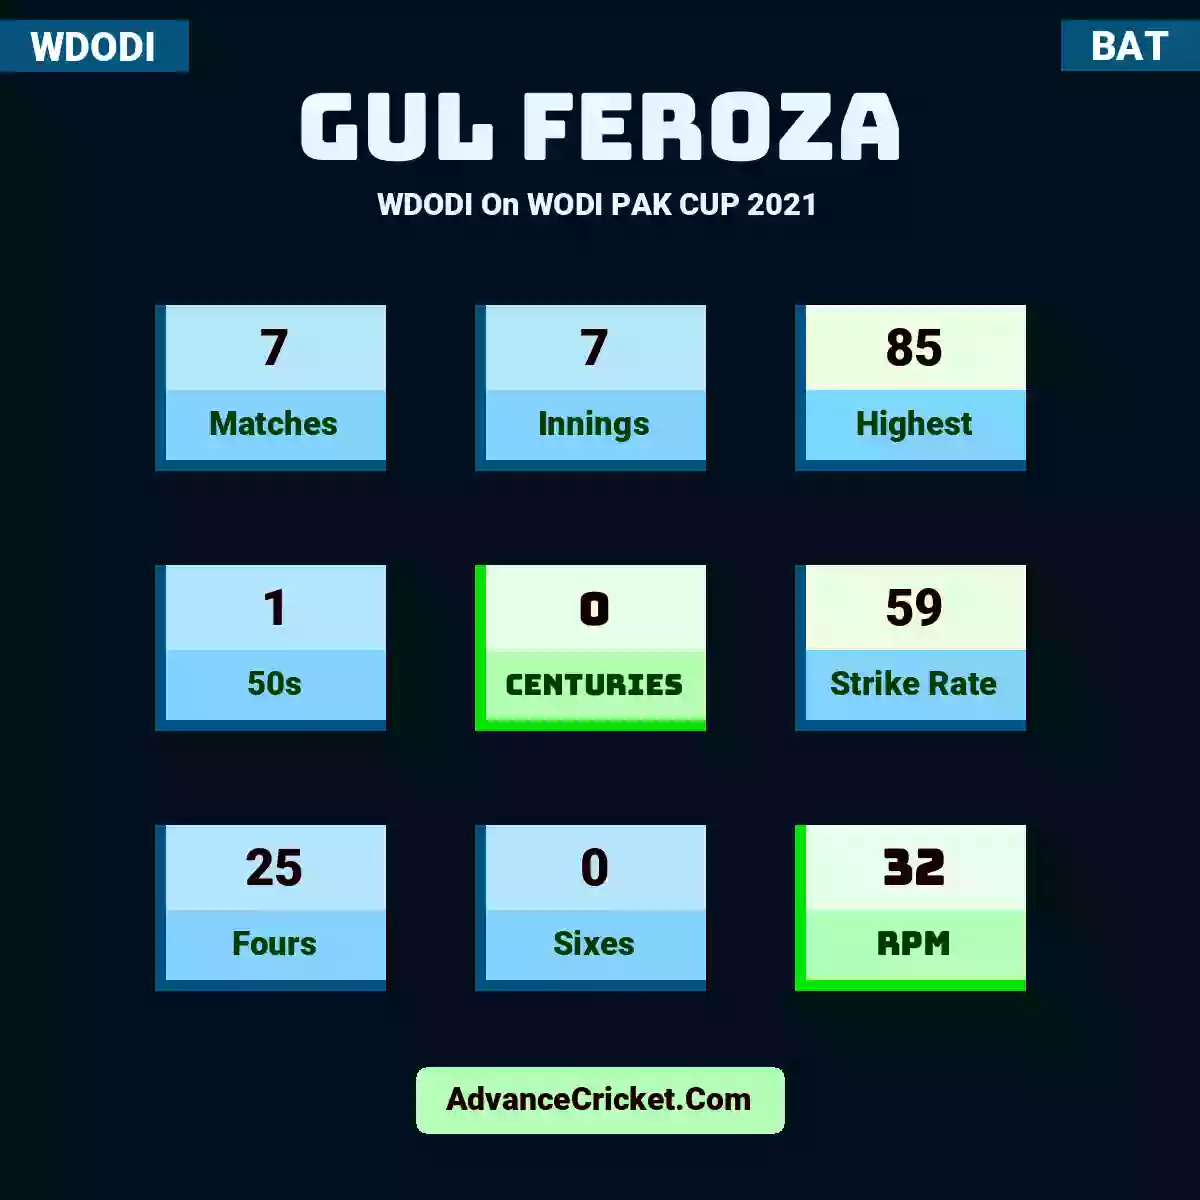 Gul Feroza WDODI  On WODI PAK CUP 2021, Gul Feroza played 7 matches, scored 85 runs as highest, 1 half-centuries, and 0 centuries, with a strike rate of 59. G.Feroza hit 25 fours and 0 sixes, with an RPM of 32.